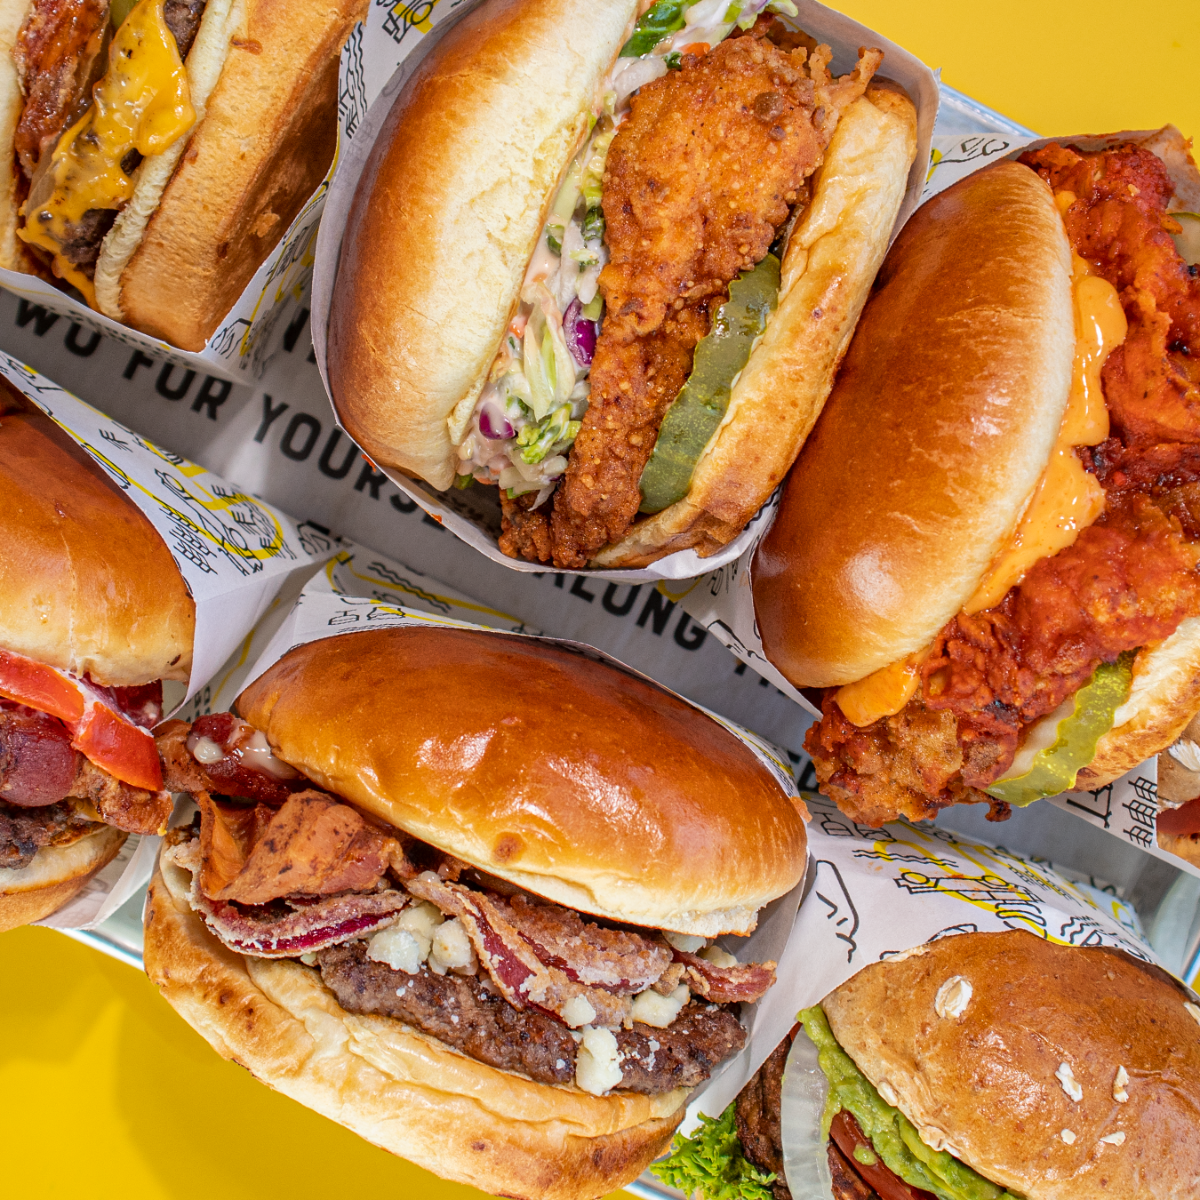 Fresh Stack Burger is Opening Two New Locations in 2022